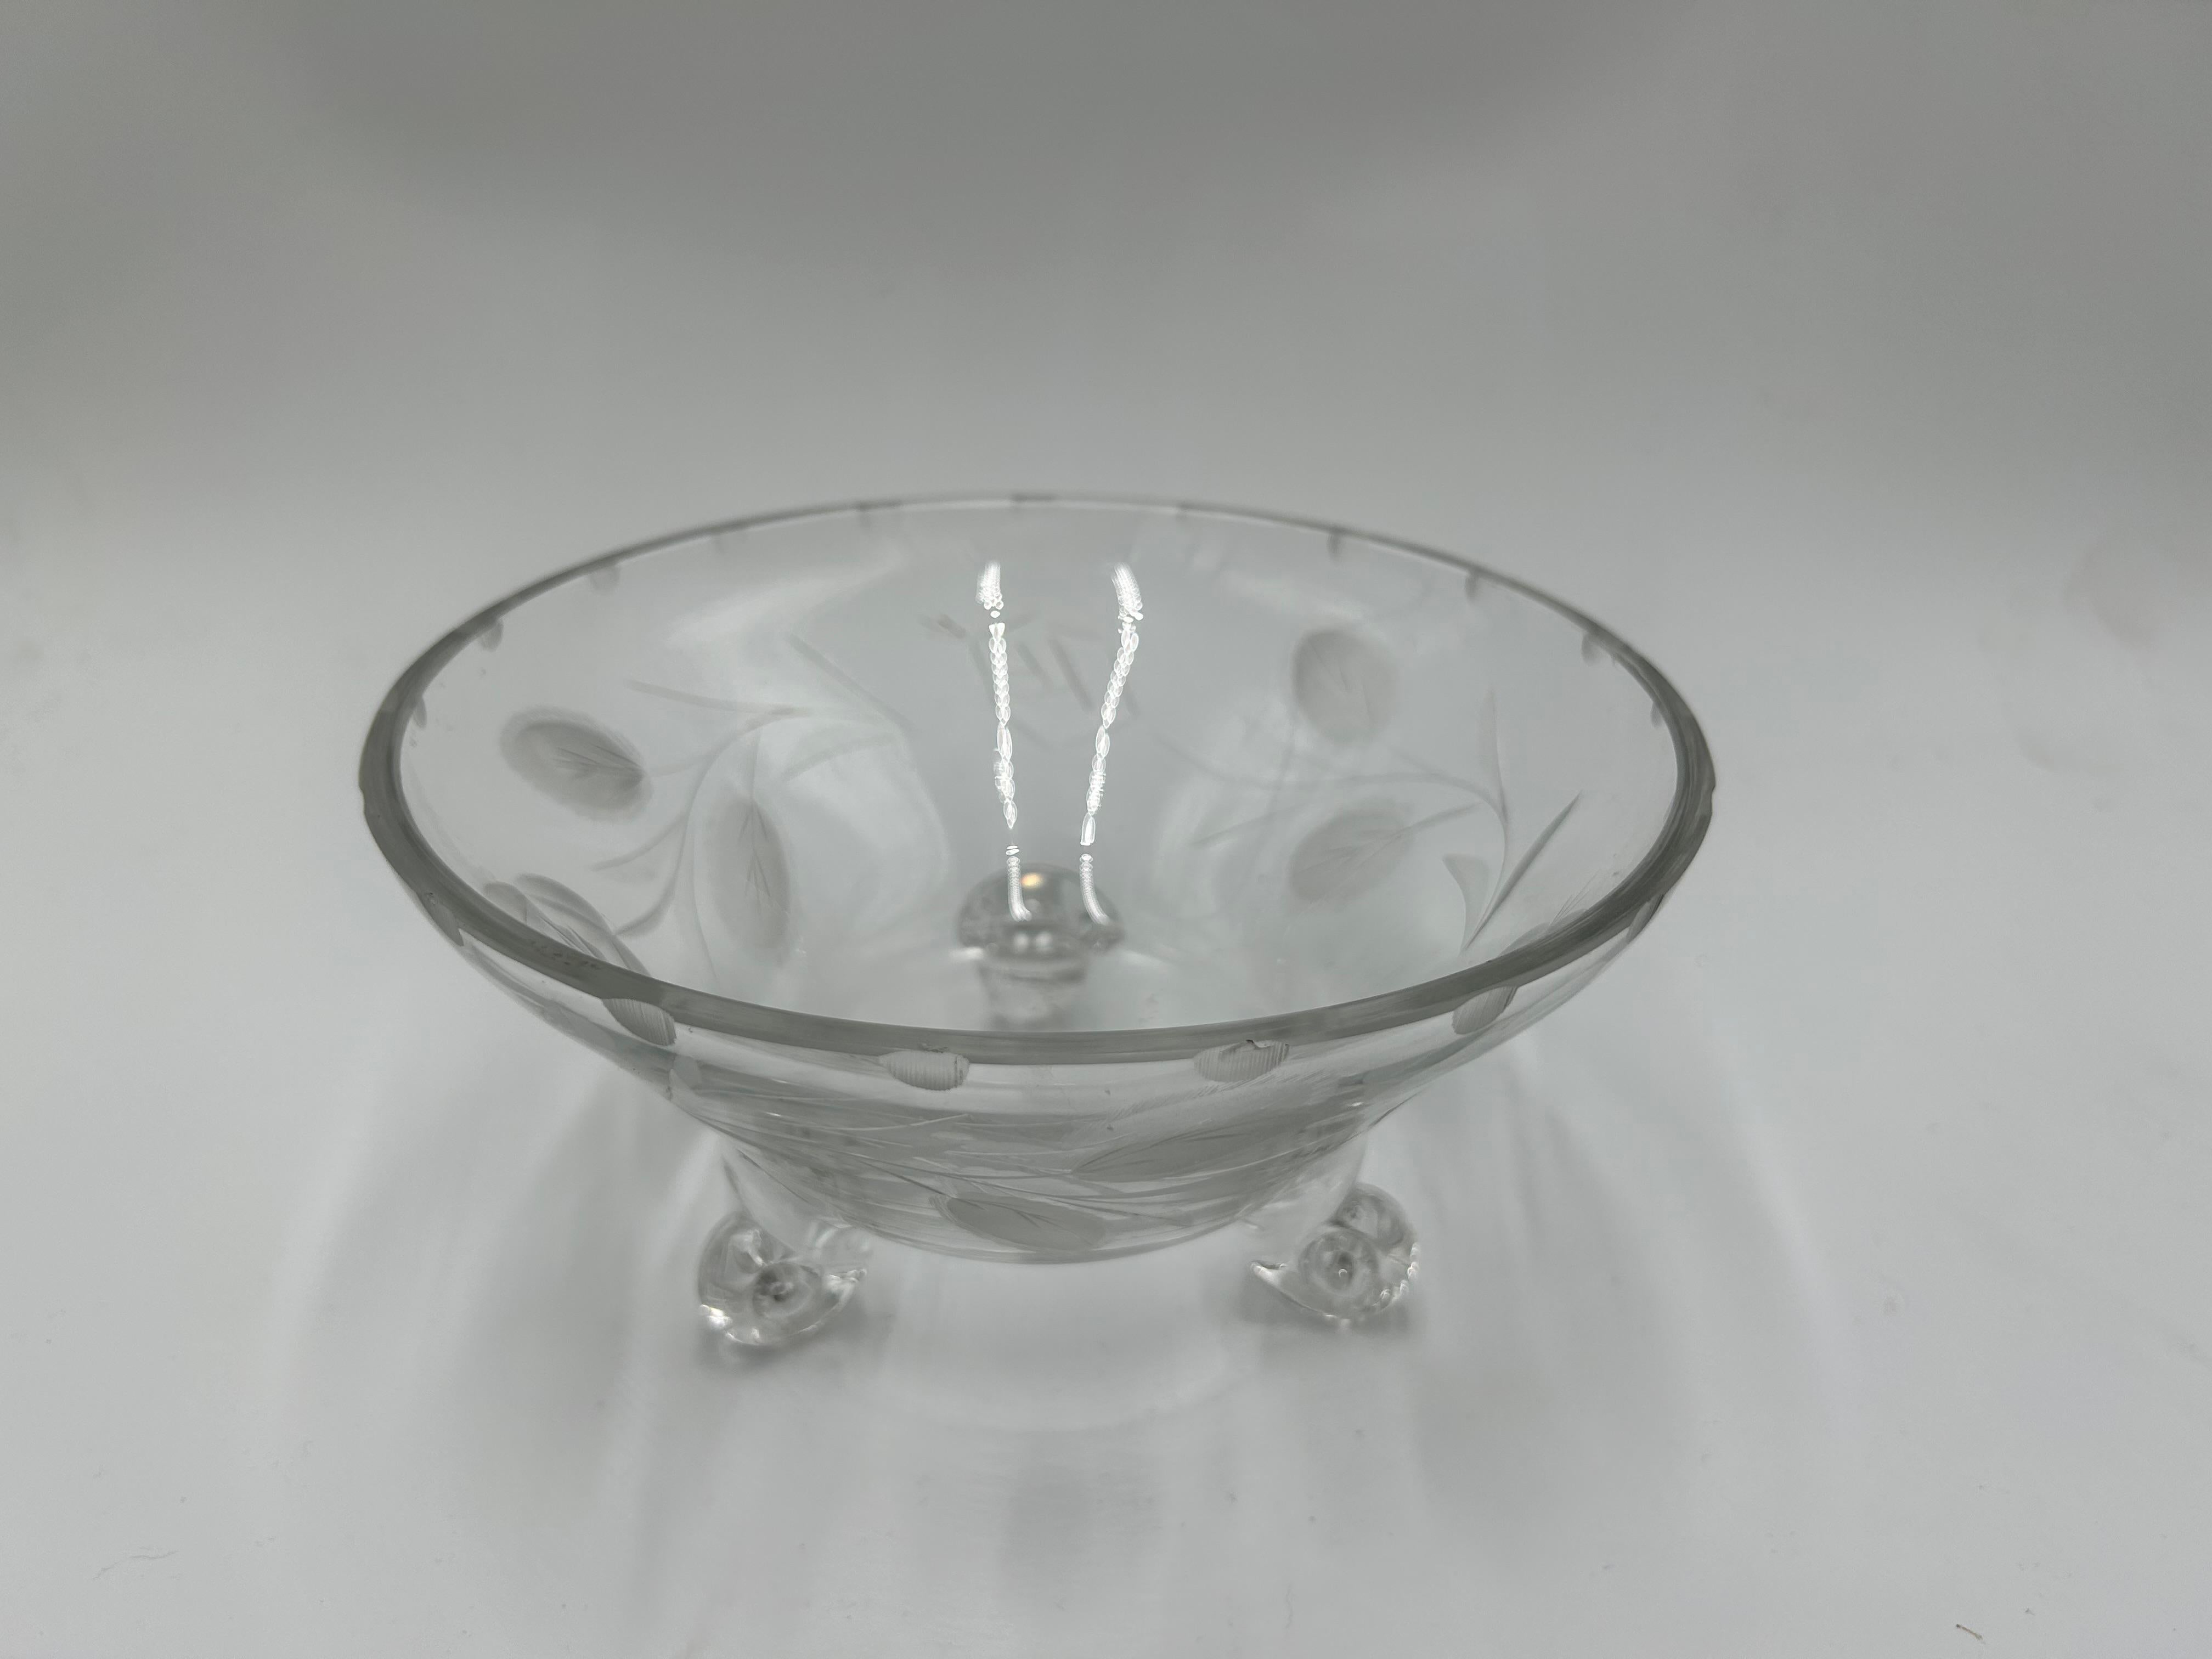 Glass decorative bowl produced in Poland in circa 1960s.
Preserved in very good condition.